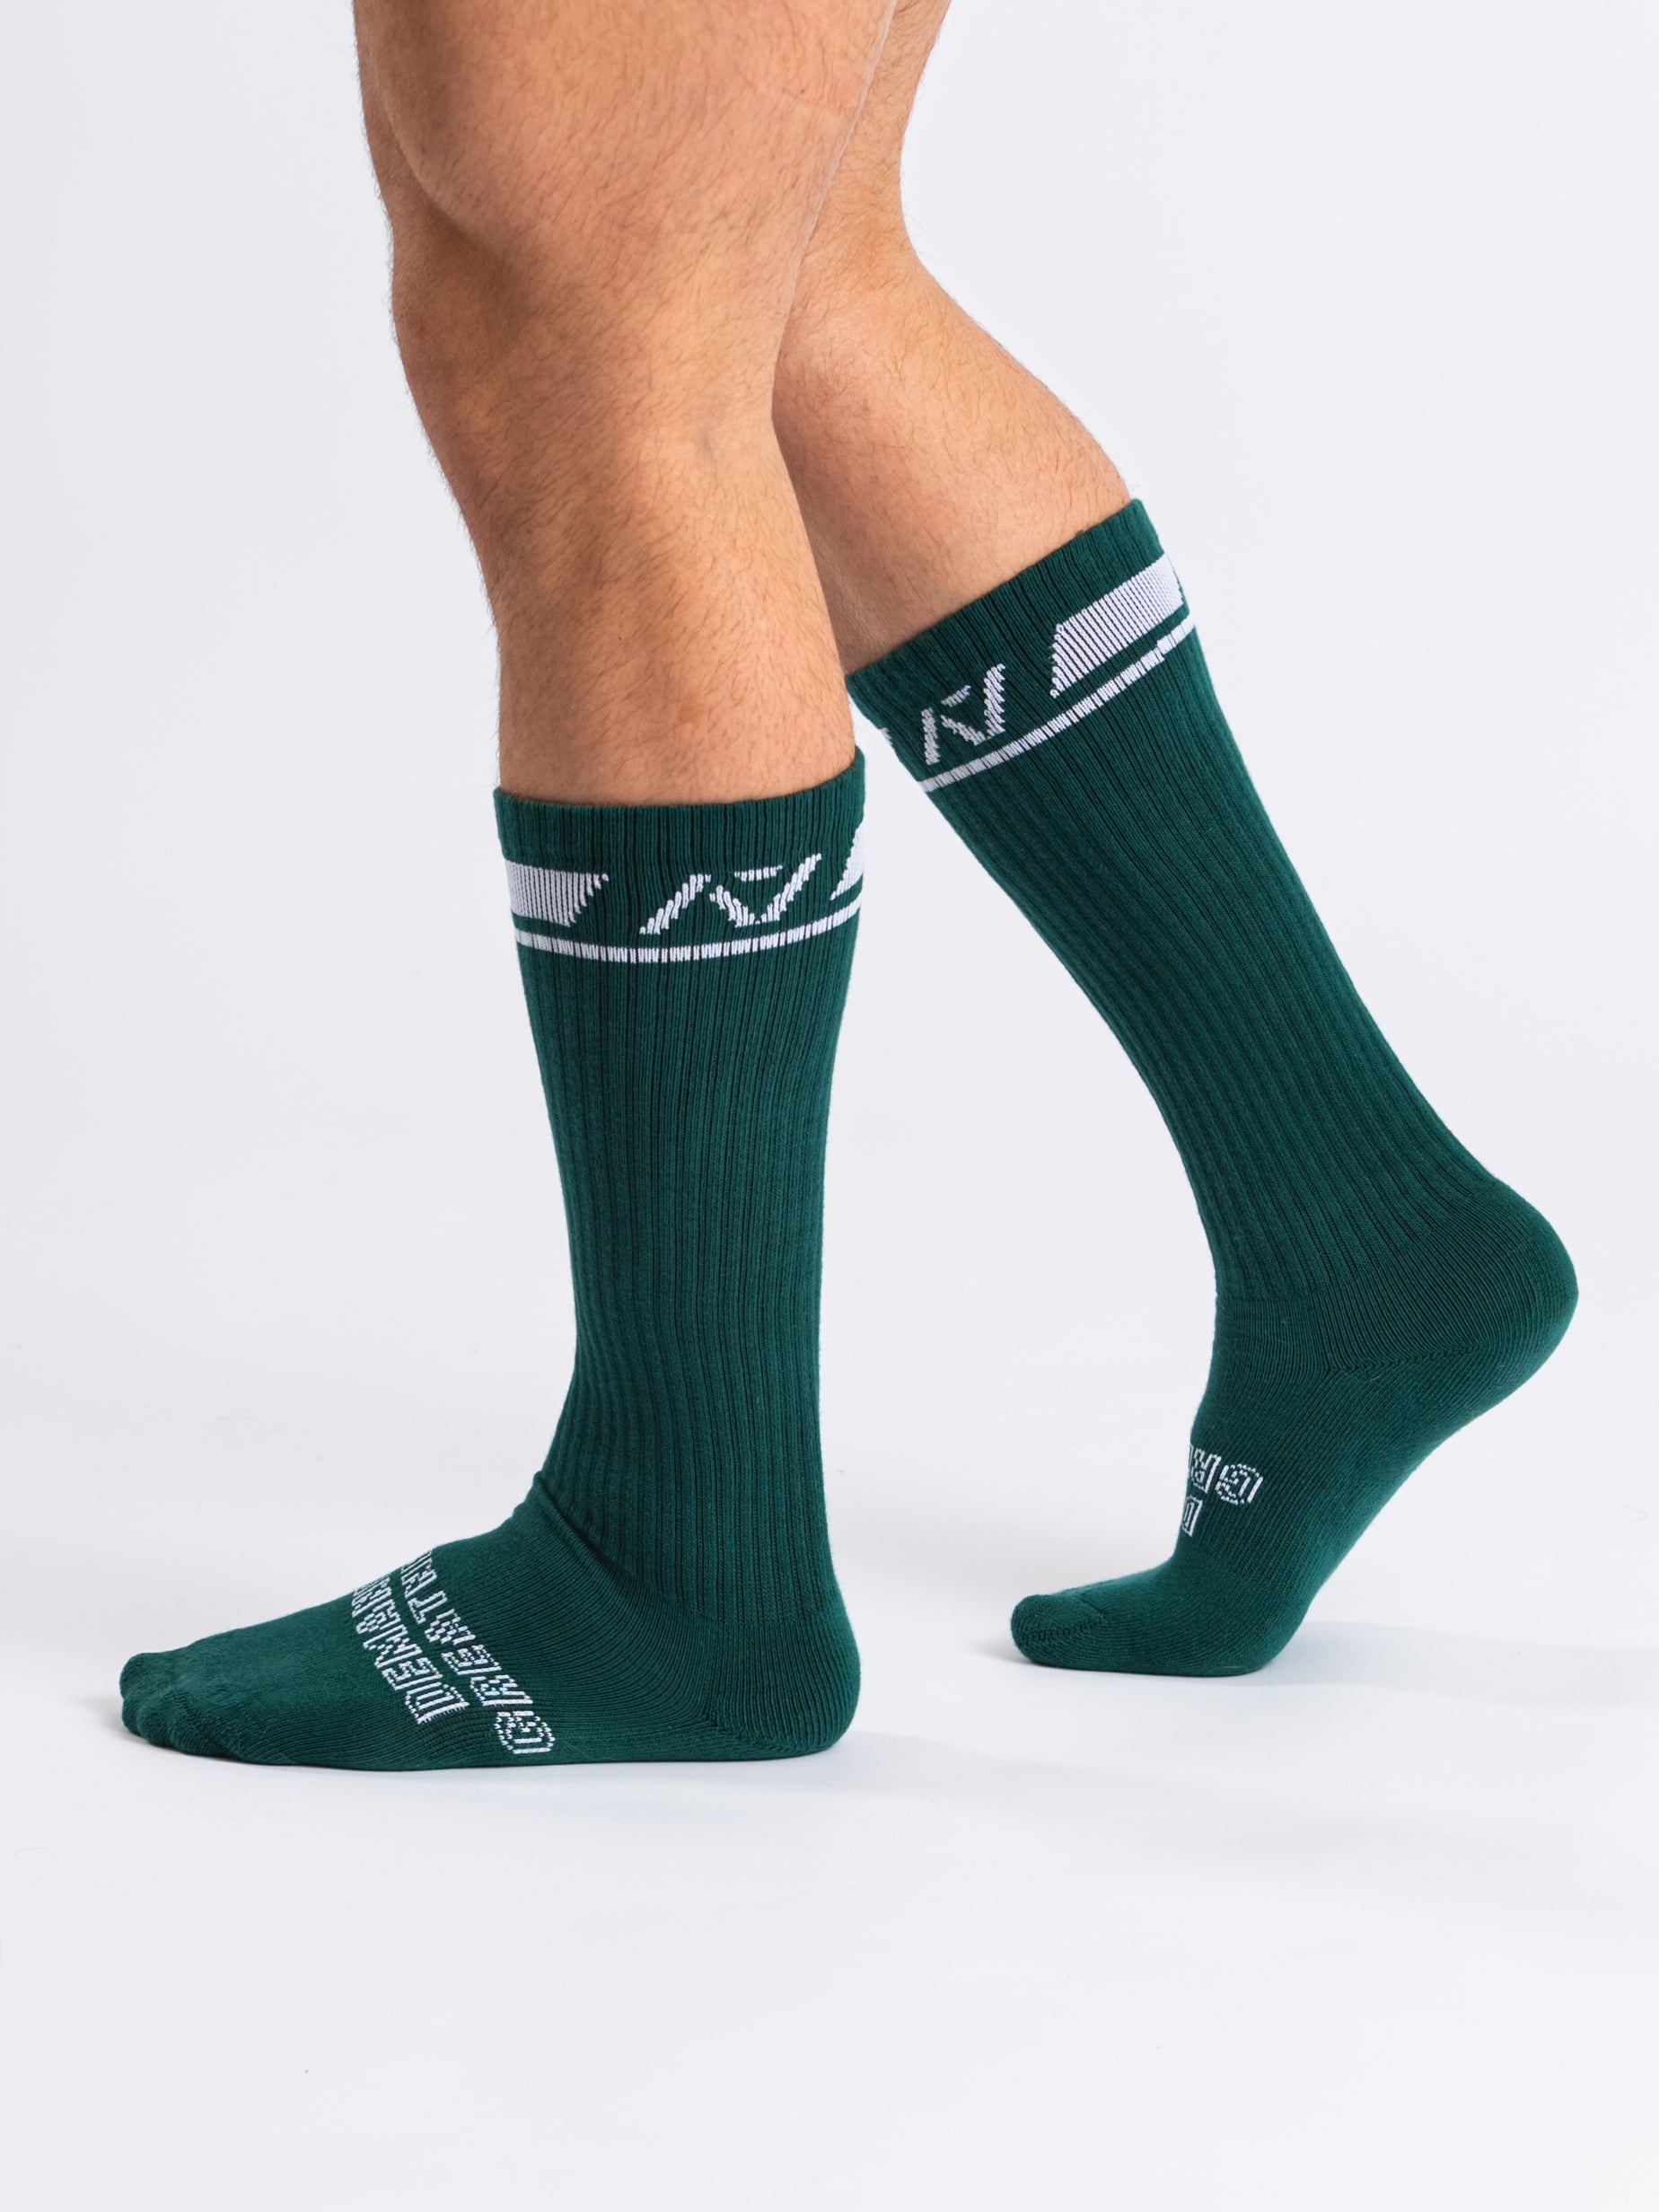 A7 Emerald Forás deadlift socks are designed specifically for pulls and keep your shins protected from scrapes. A7 deadlift socks are a perfect pair to wear in training or powerlifting competition. The A7 IPF Approved Kit includes Powerlifting Singlet, A7 Meet Shirt, A7 Zebra Wrist Wraps, A7 Deadlift Socks, Hourglass Knee Sleeves (Stiff Knee Sleeves and Rigor Mortis Knee Sleeves). All A7 Powerlifting Equipment shipping to UK, Norway, Switzerland and Iceland.